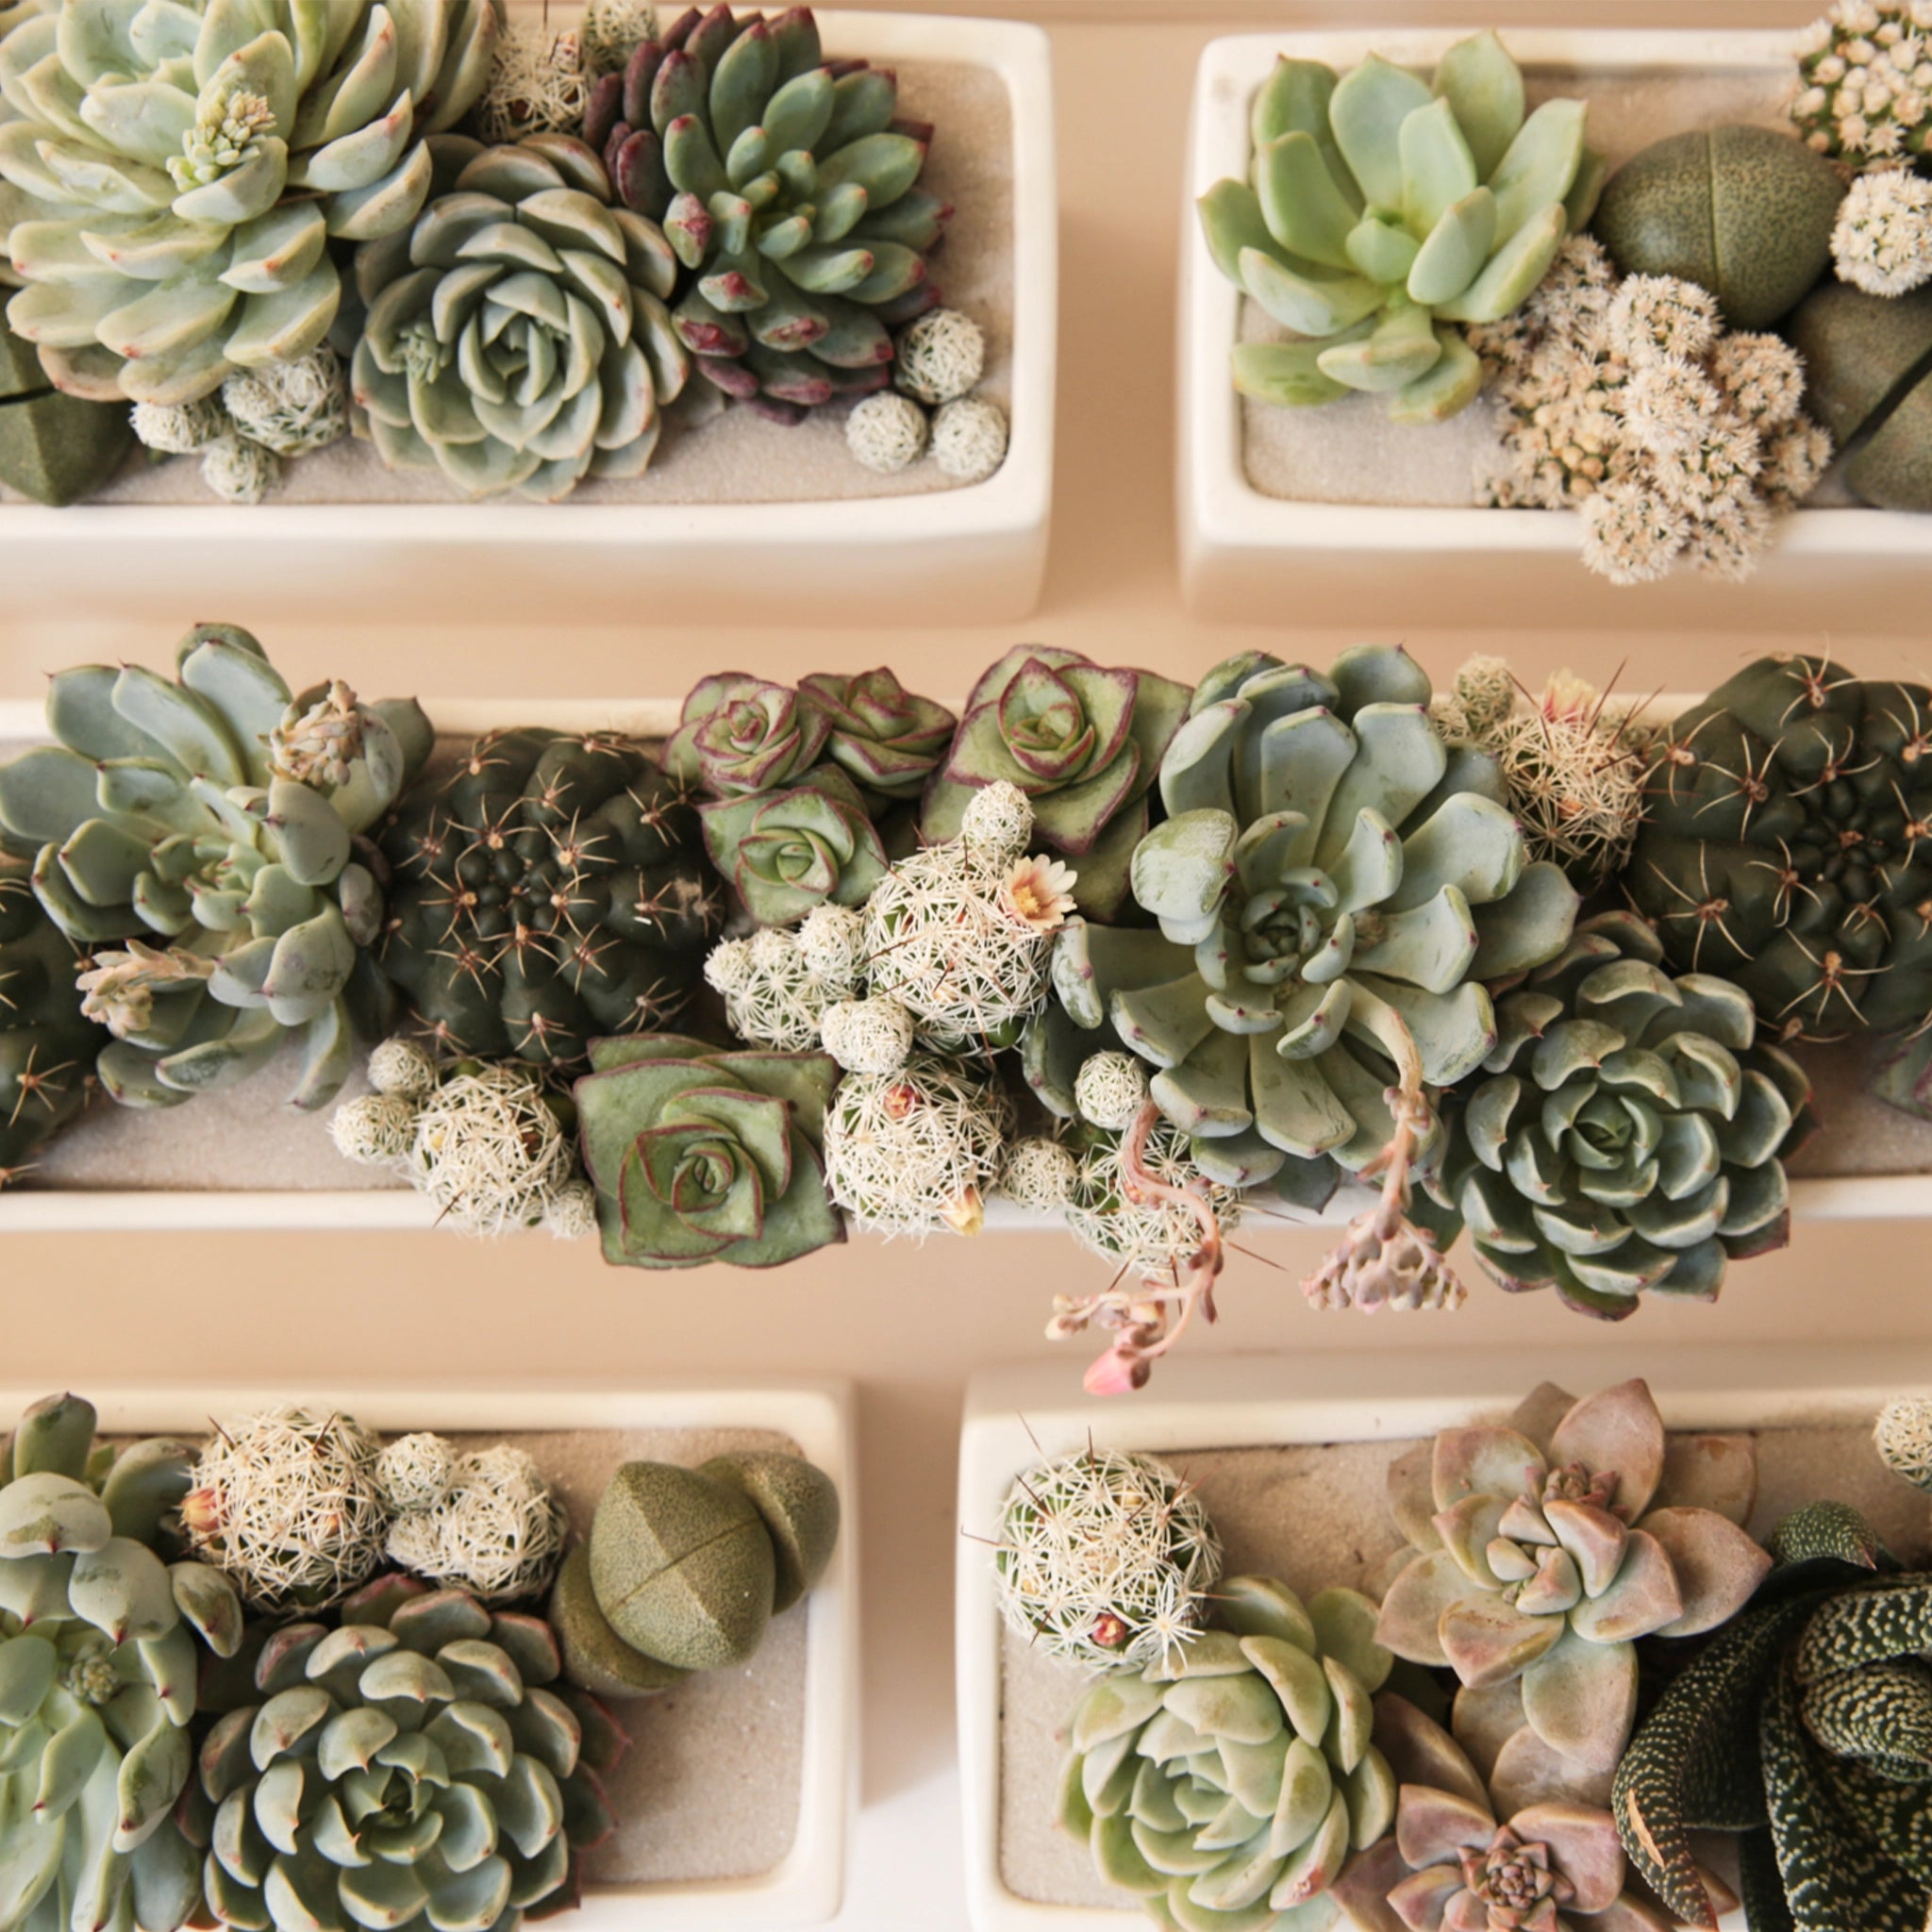 A long rectangular ceramic planter filled with succulents (not included with purchase).